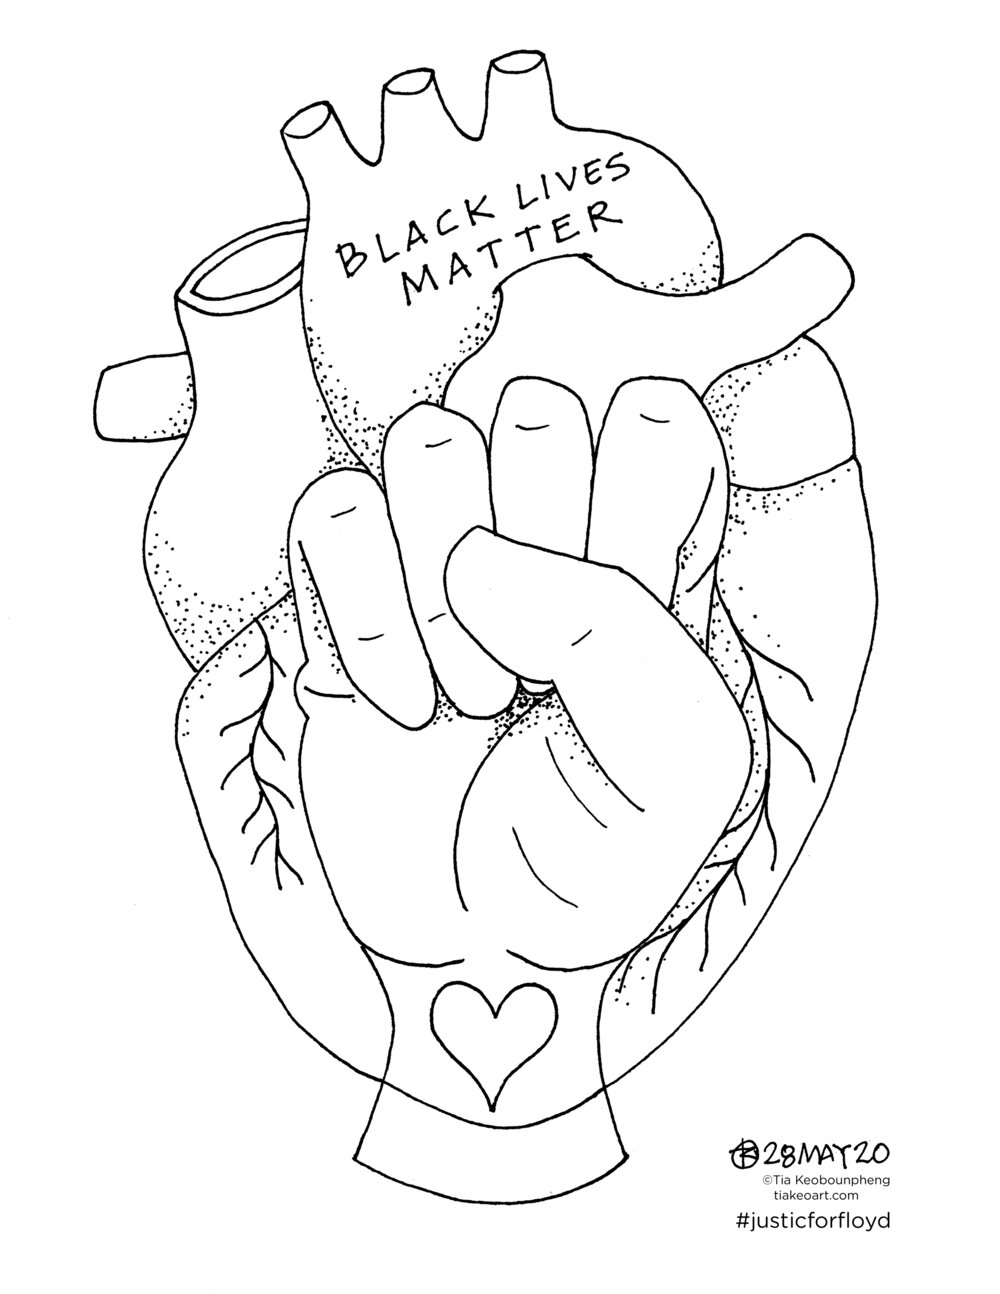 I am and Ally - Coloring Sheet — TIAKEO/art